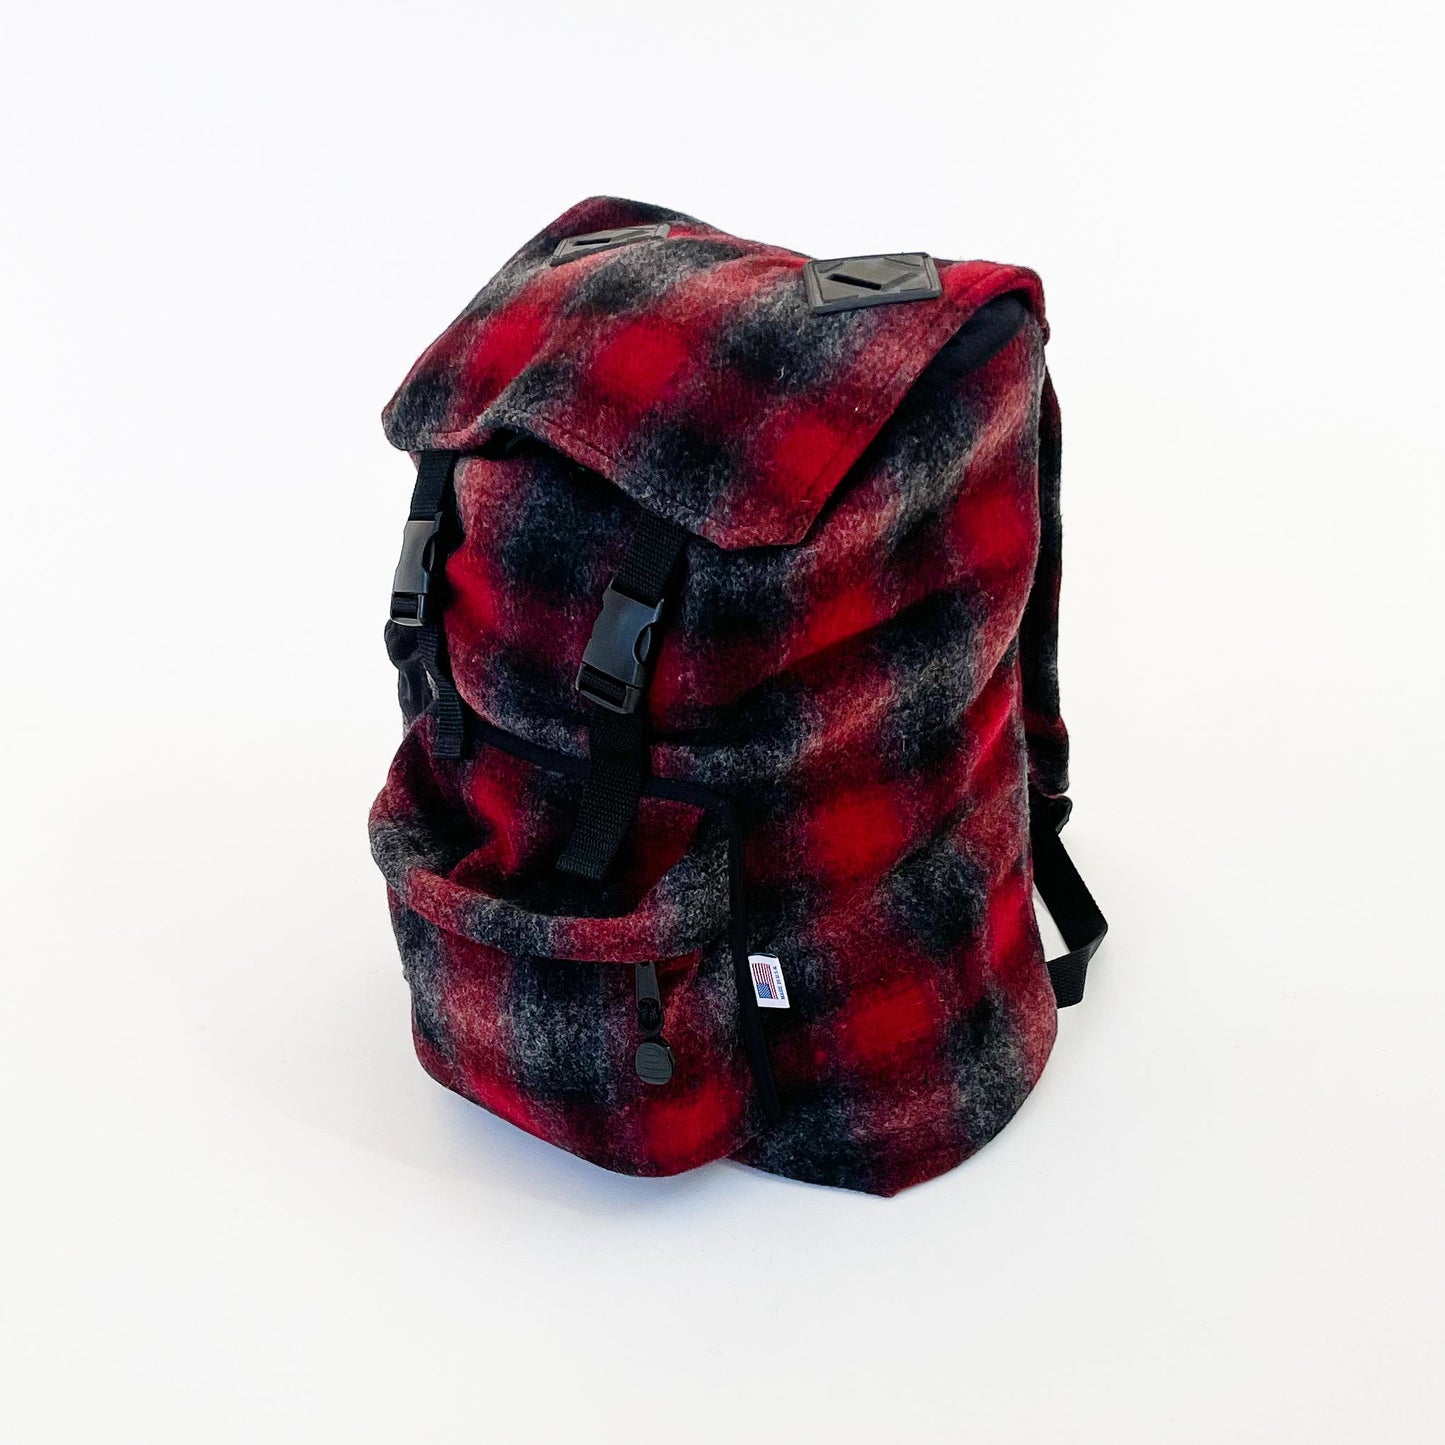 Wool back pack red , black and gray muted plaid